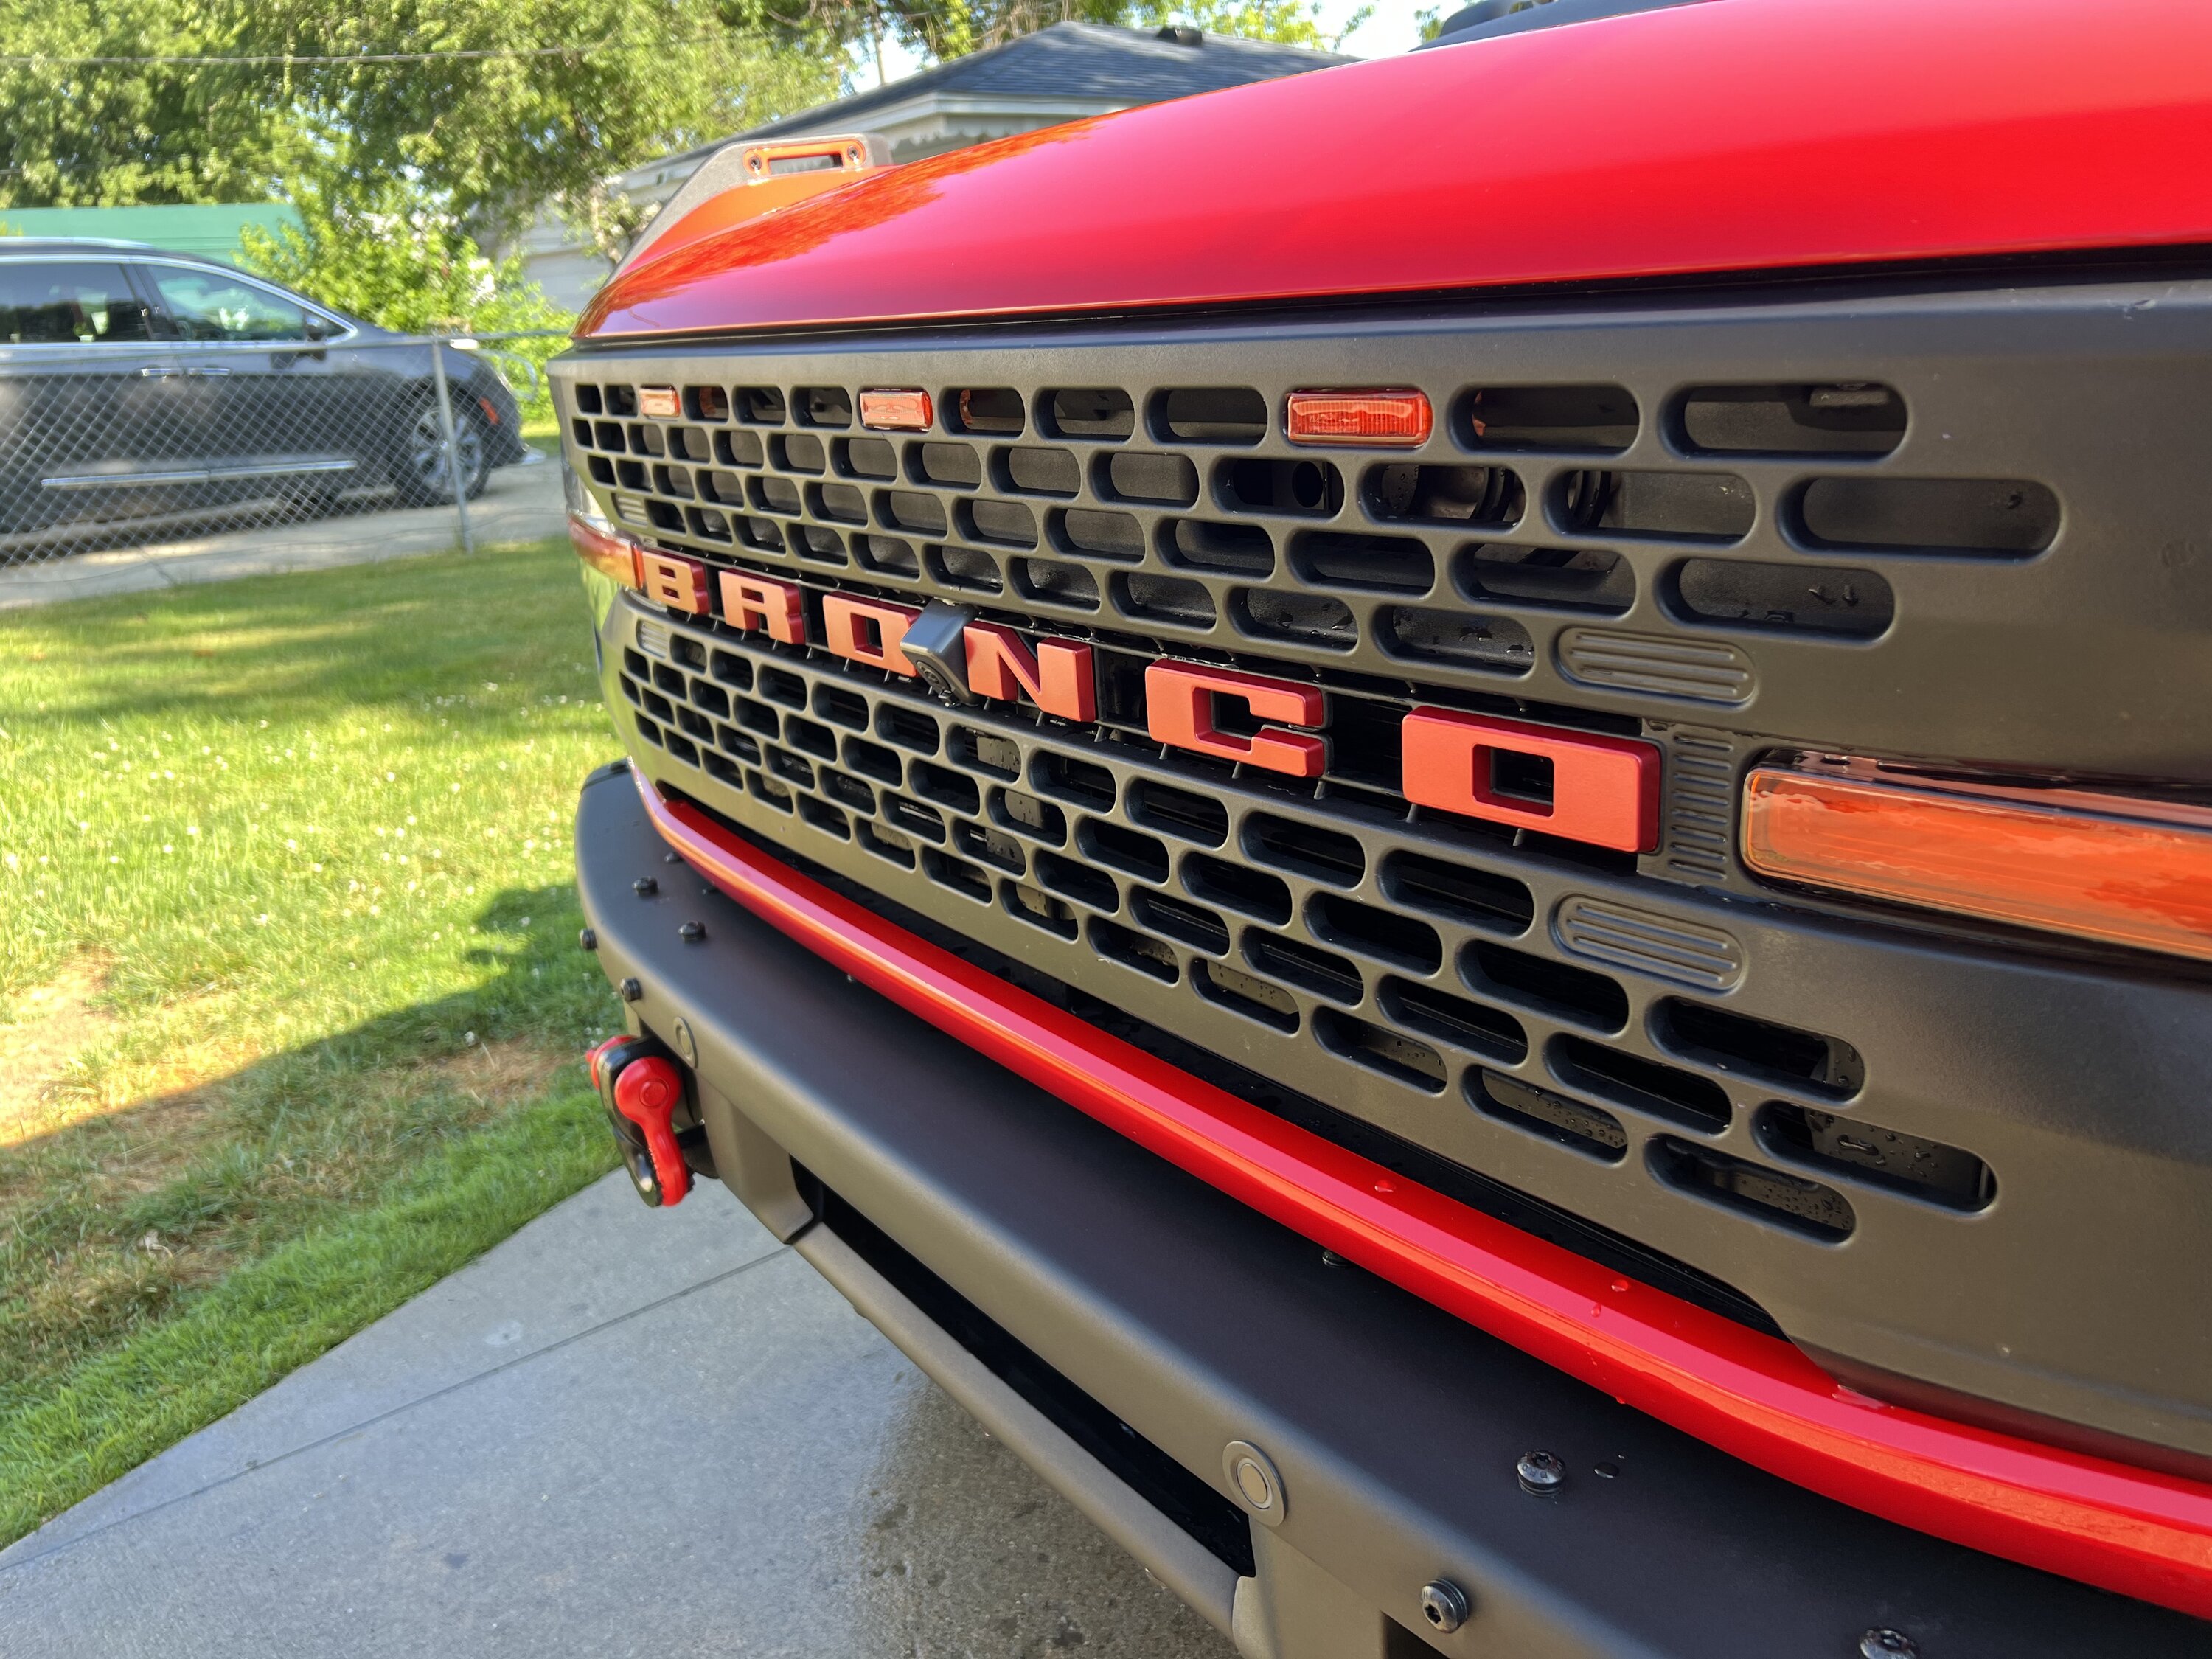 Ford Bronco Did you paint your grille??? (Pics, please!) F34C1866-BEFE-40FF-8090-09994E7B2419